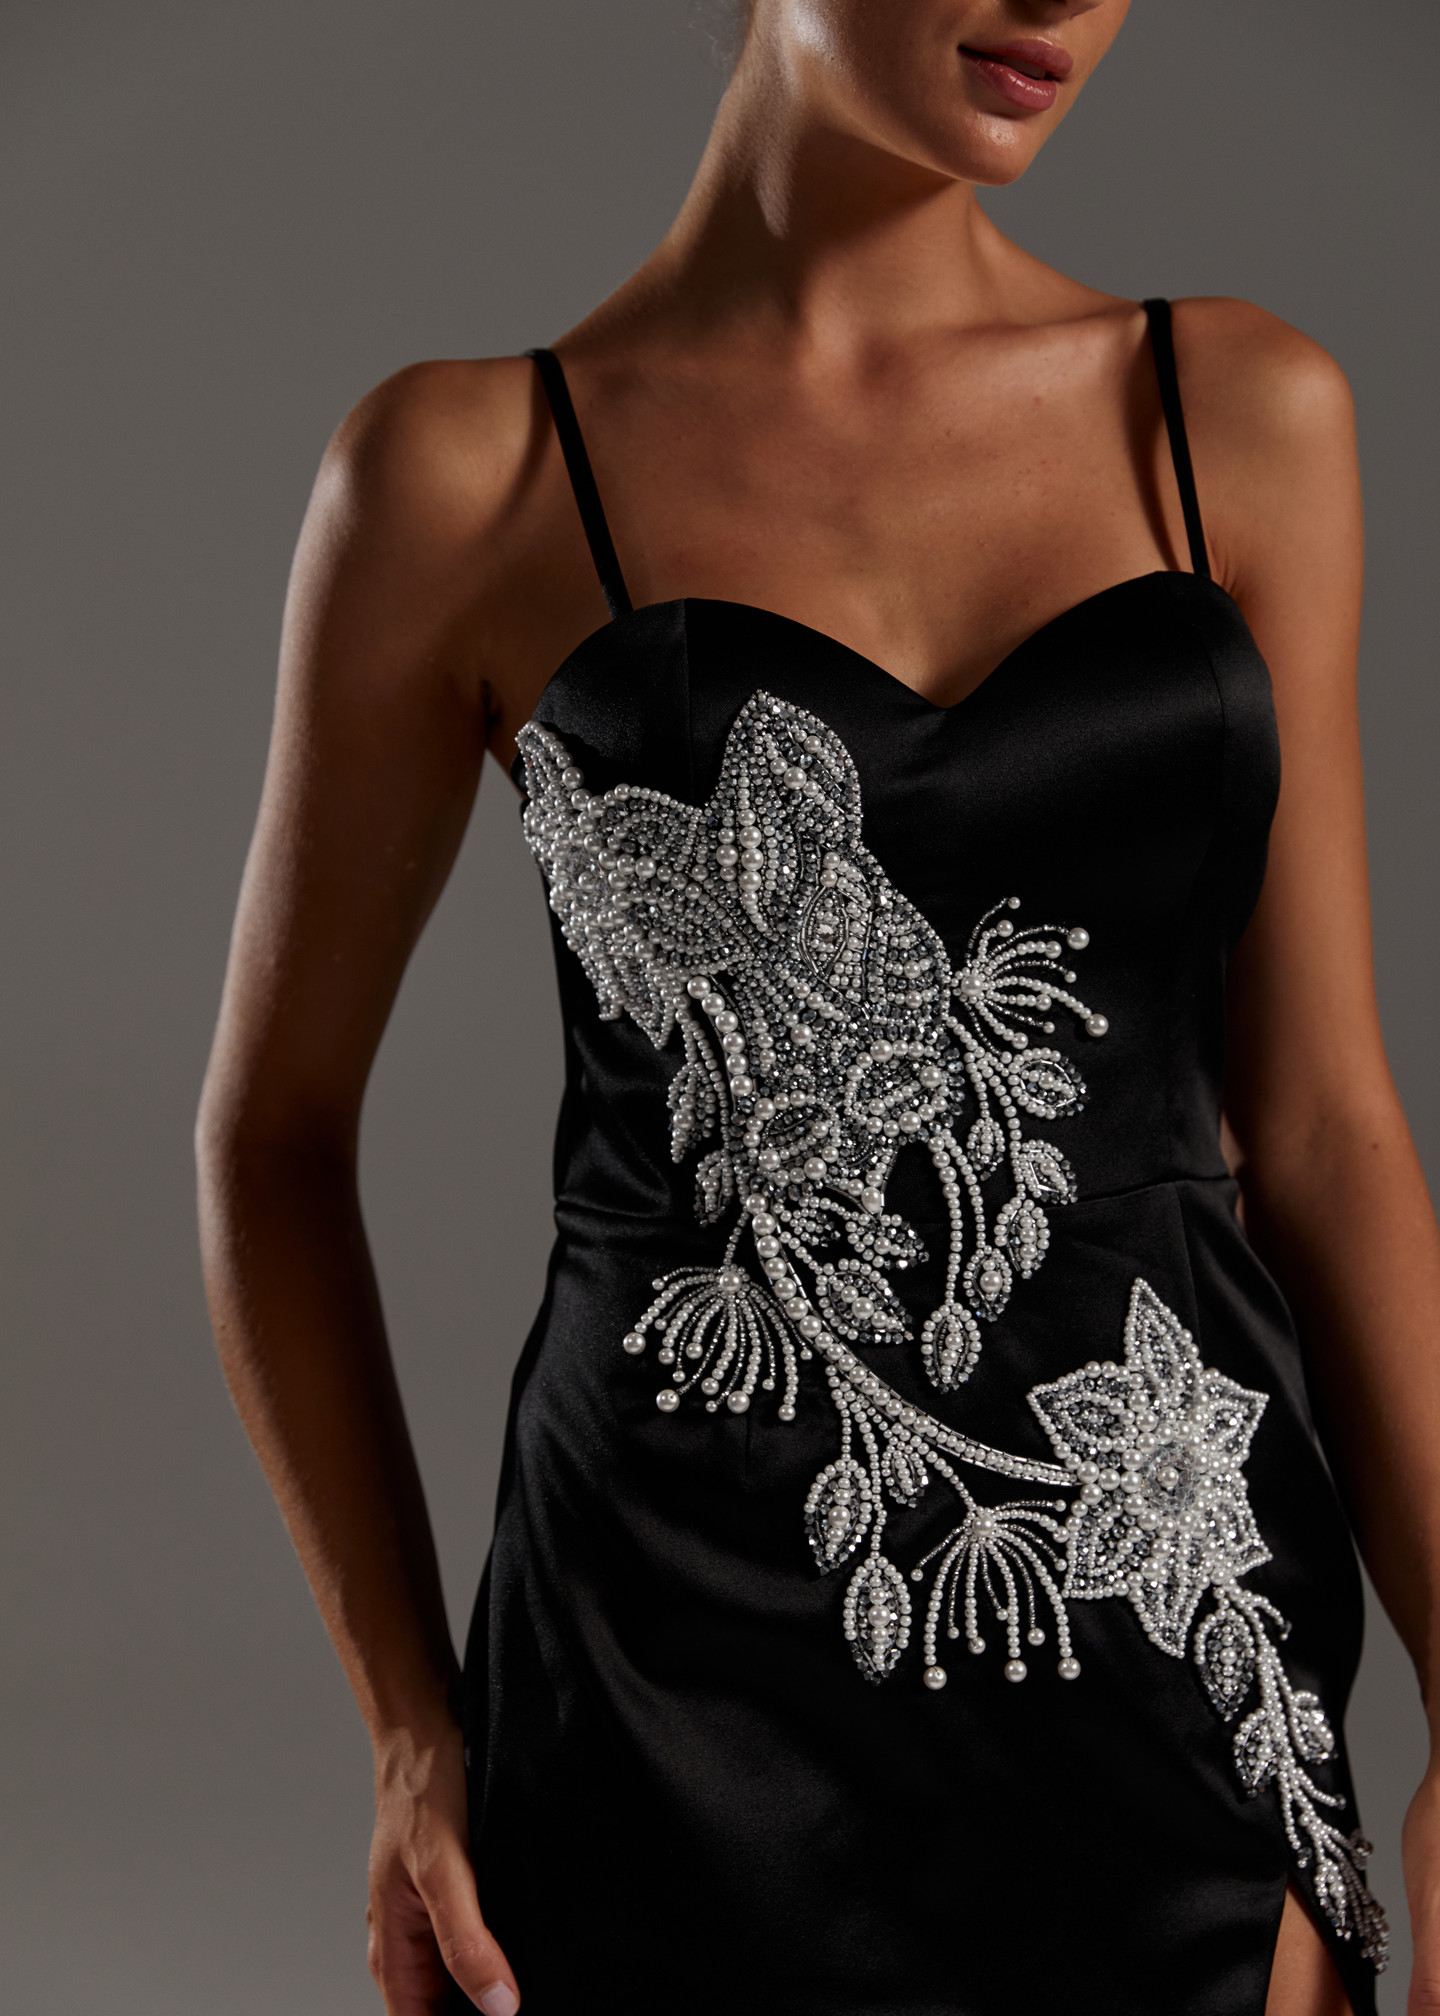 Black panther dress, 2021, couture, dress, evening, black, embroidery, sheath silhouette